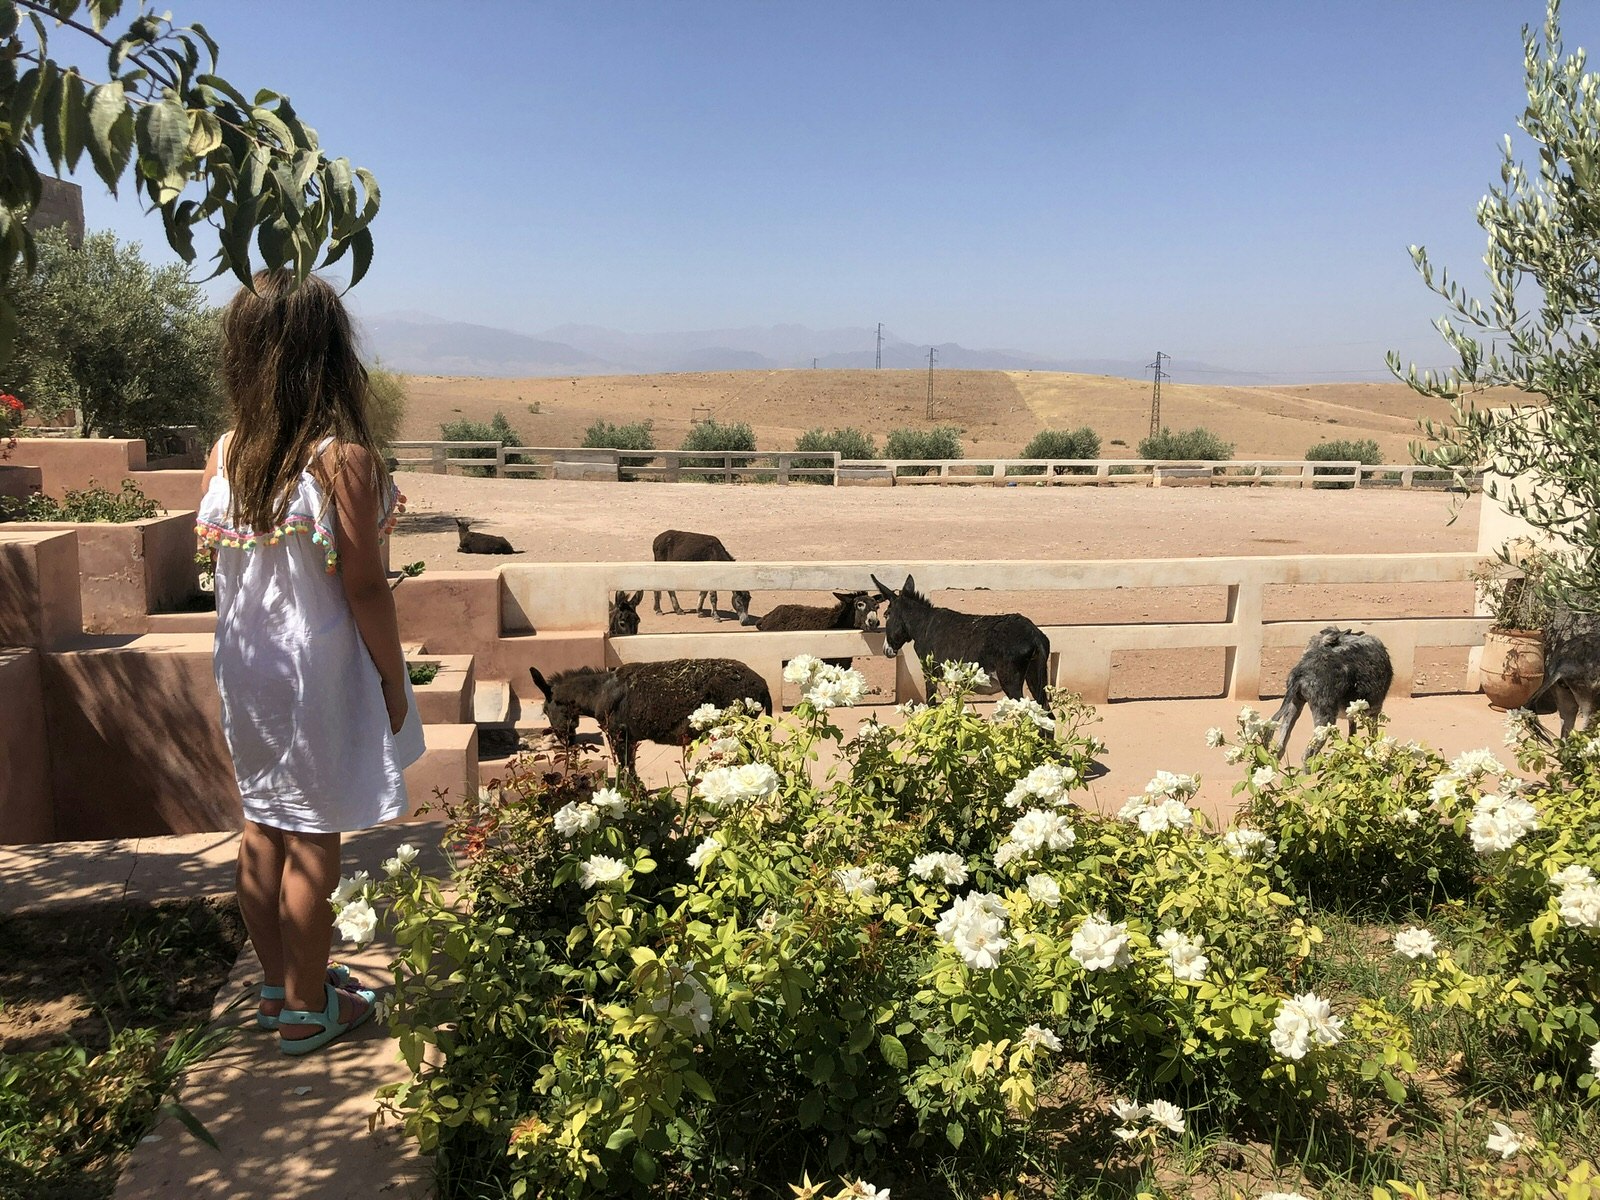 A young girl wearing a white dress and sandals stands amongst flowers while looking down into a corral that houses a few donkeys.